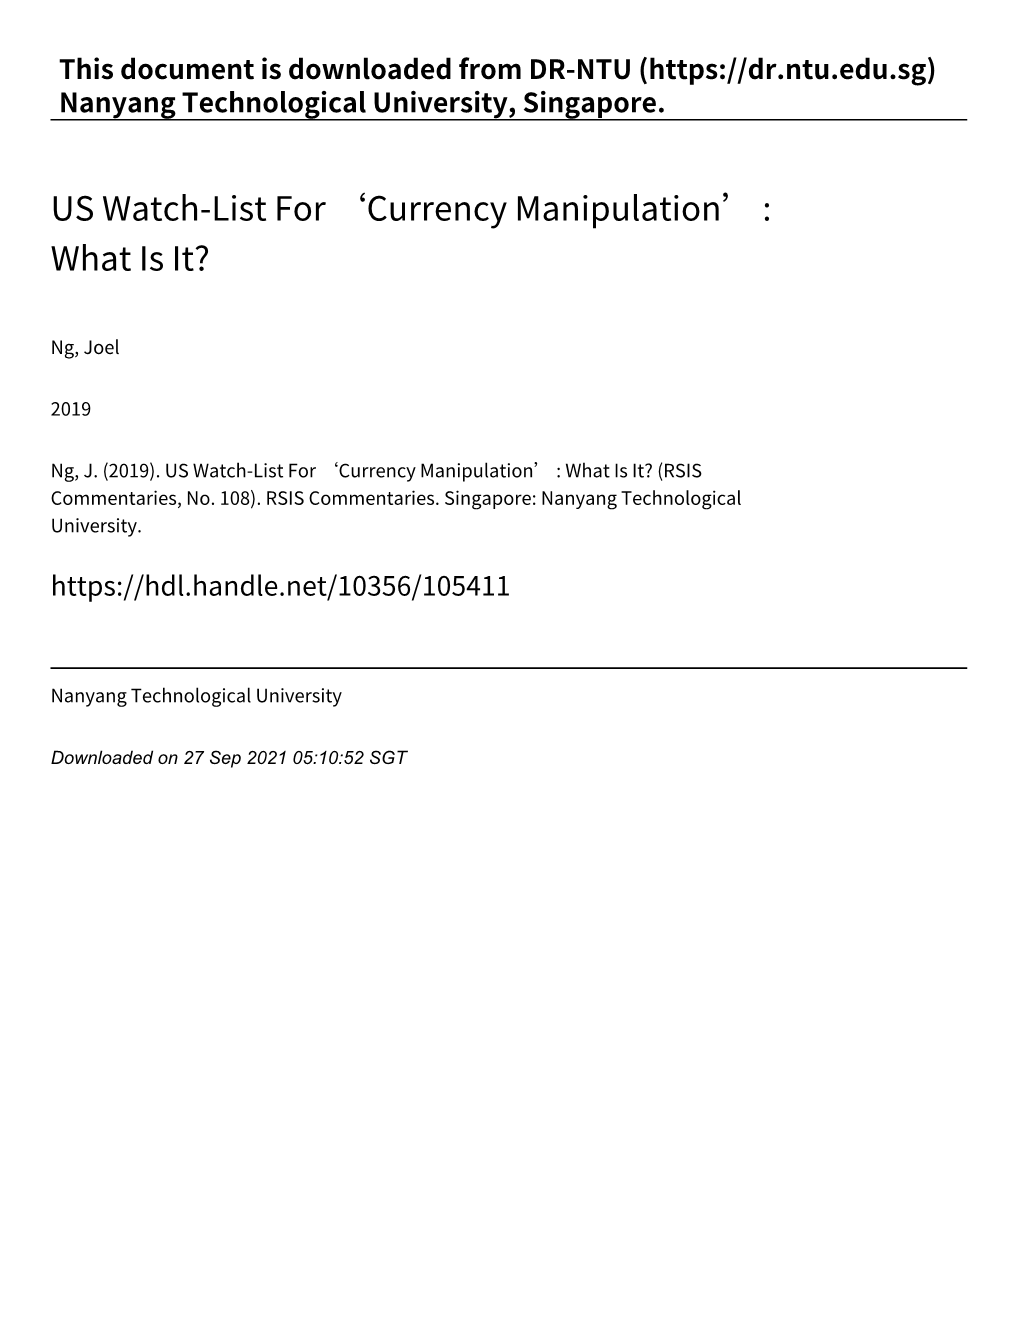 'Currency Manipulation' : What Is